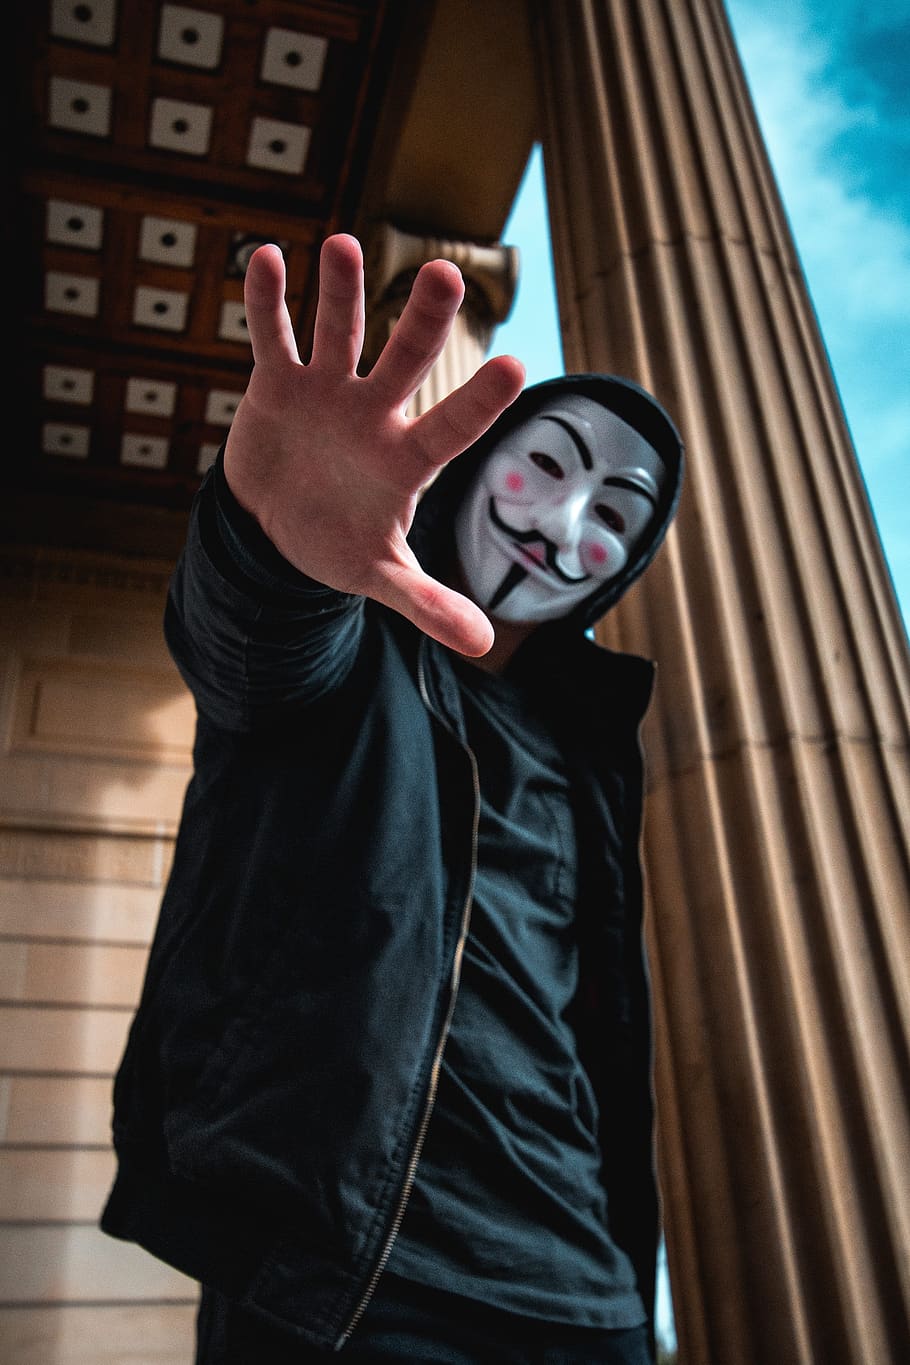 man wearing Guy Fawkes Mask standing inside building, person